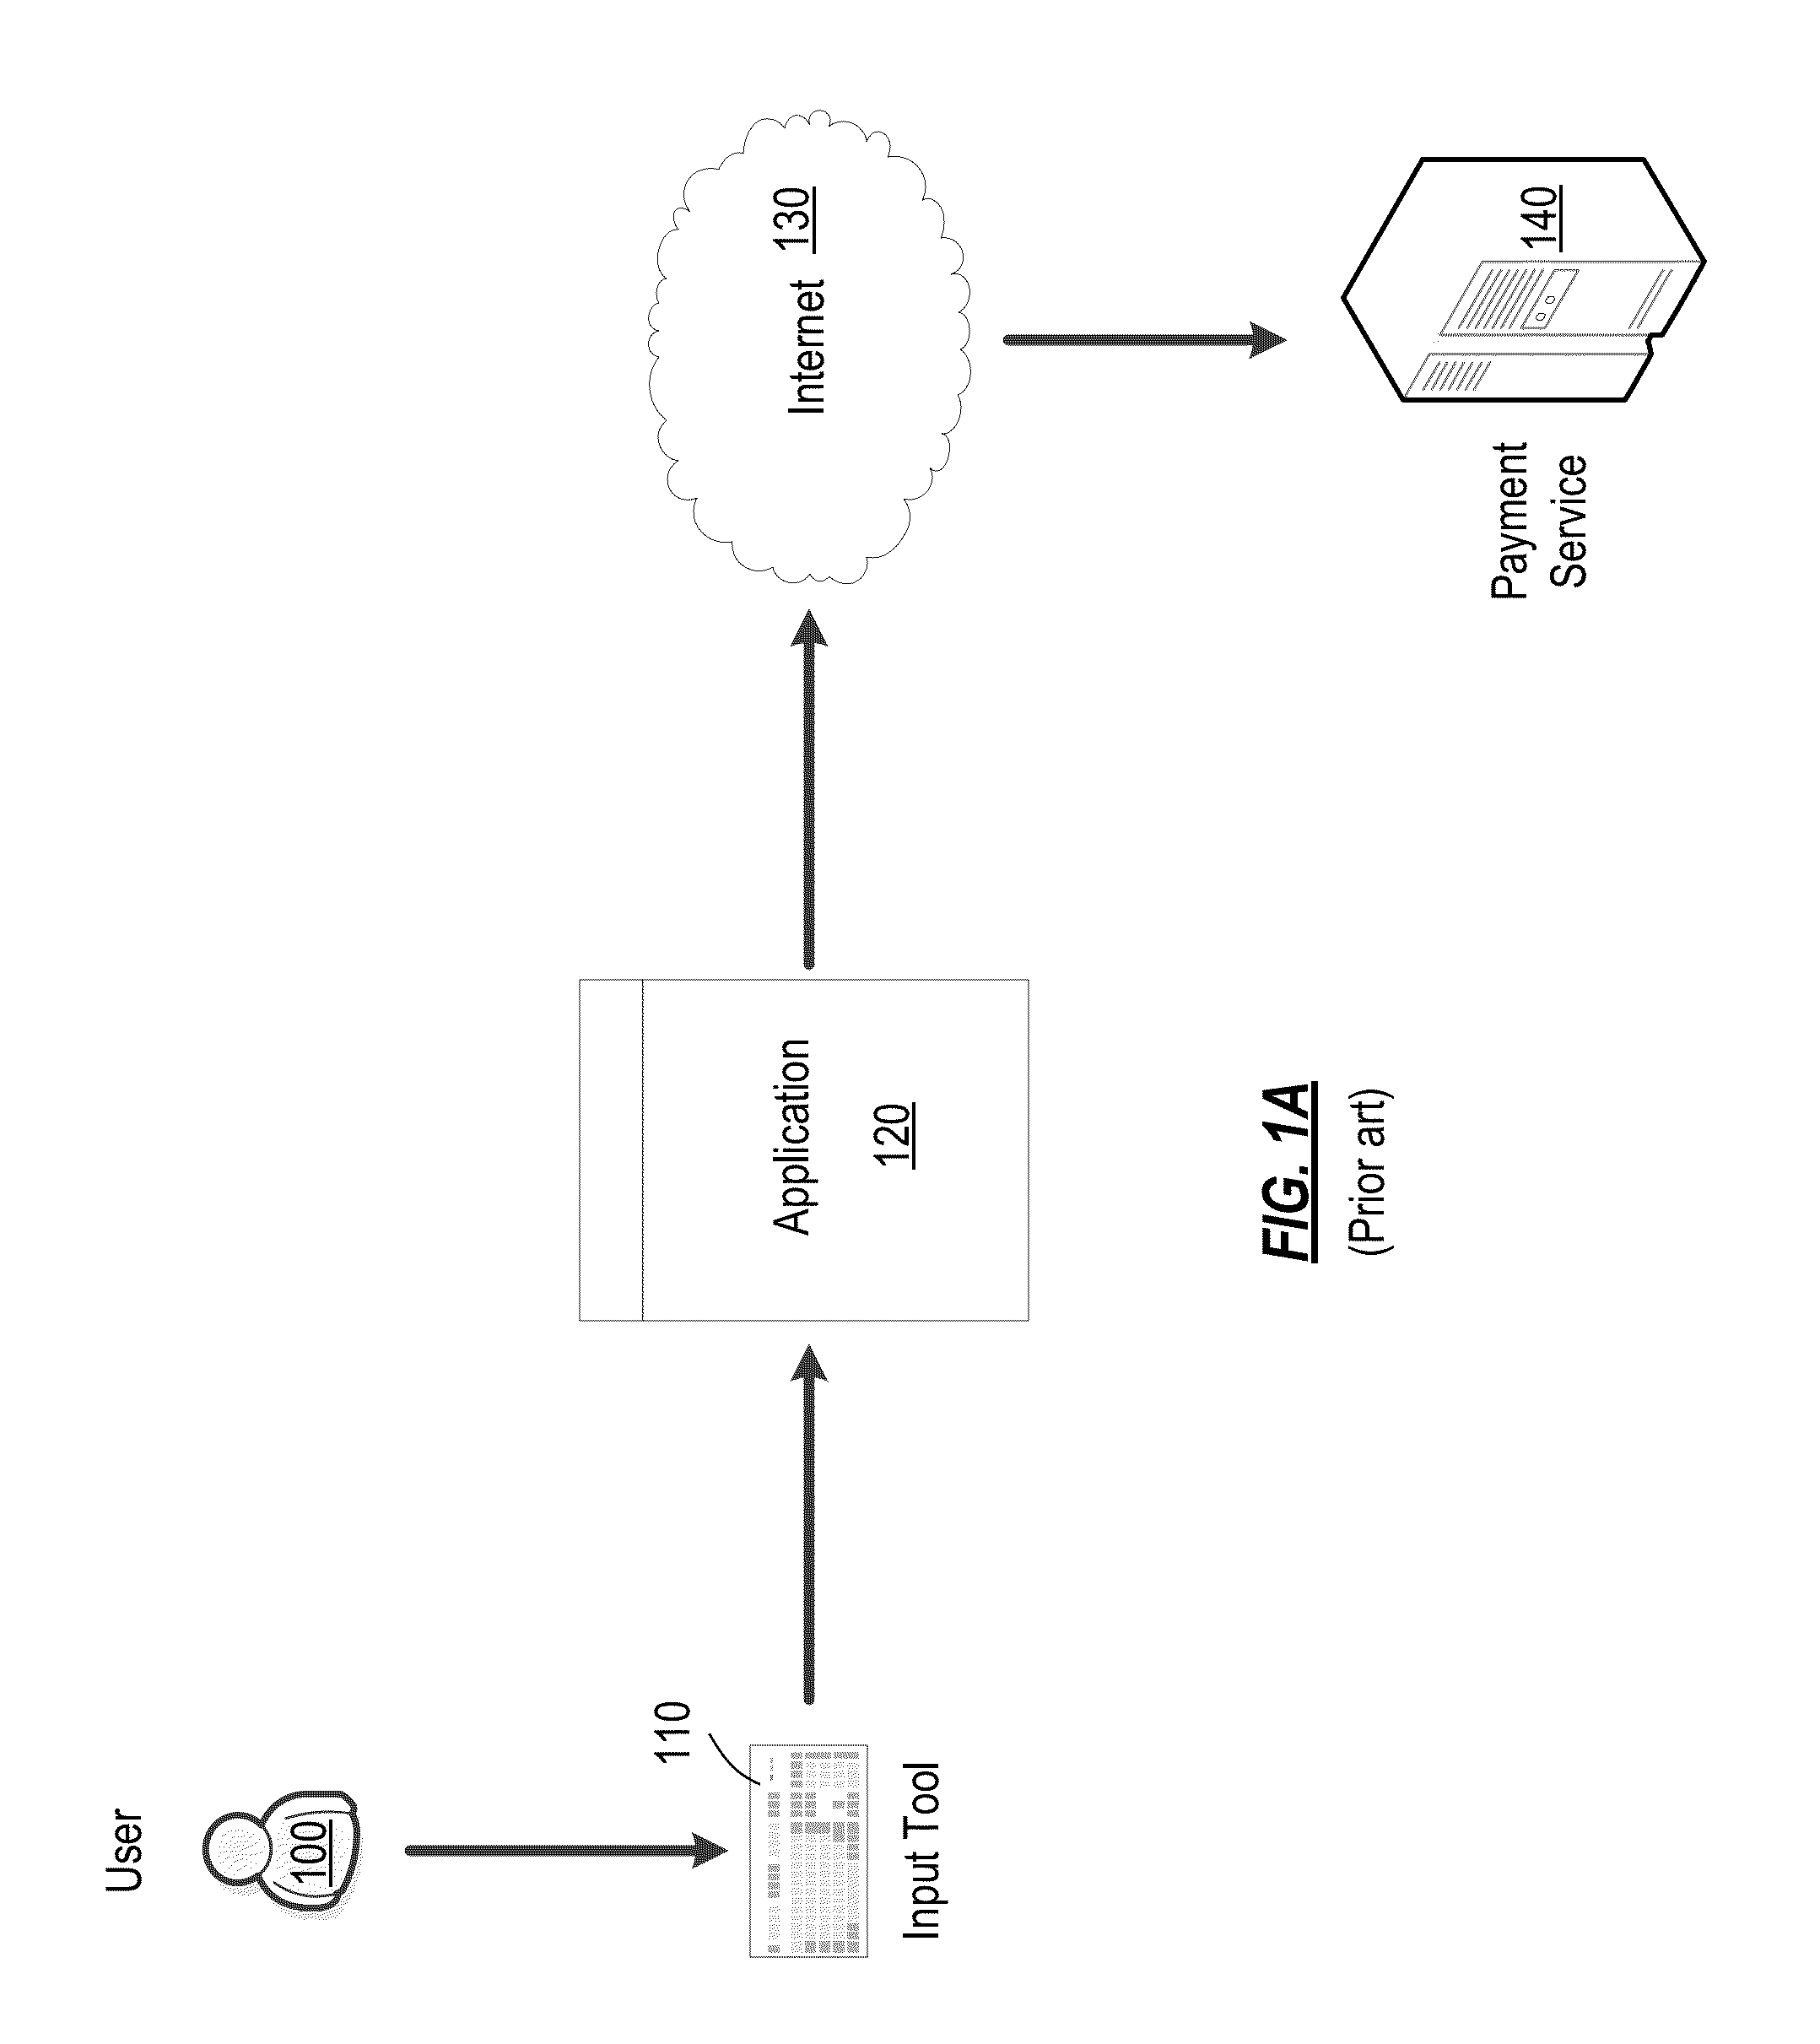 System and method for ensuring safety of online transactions